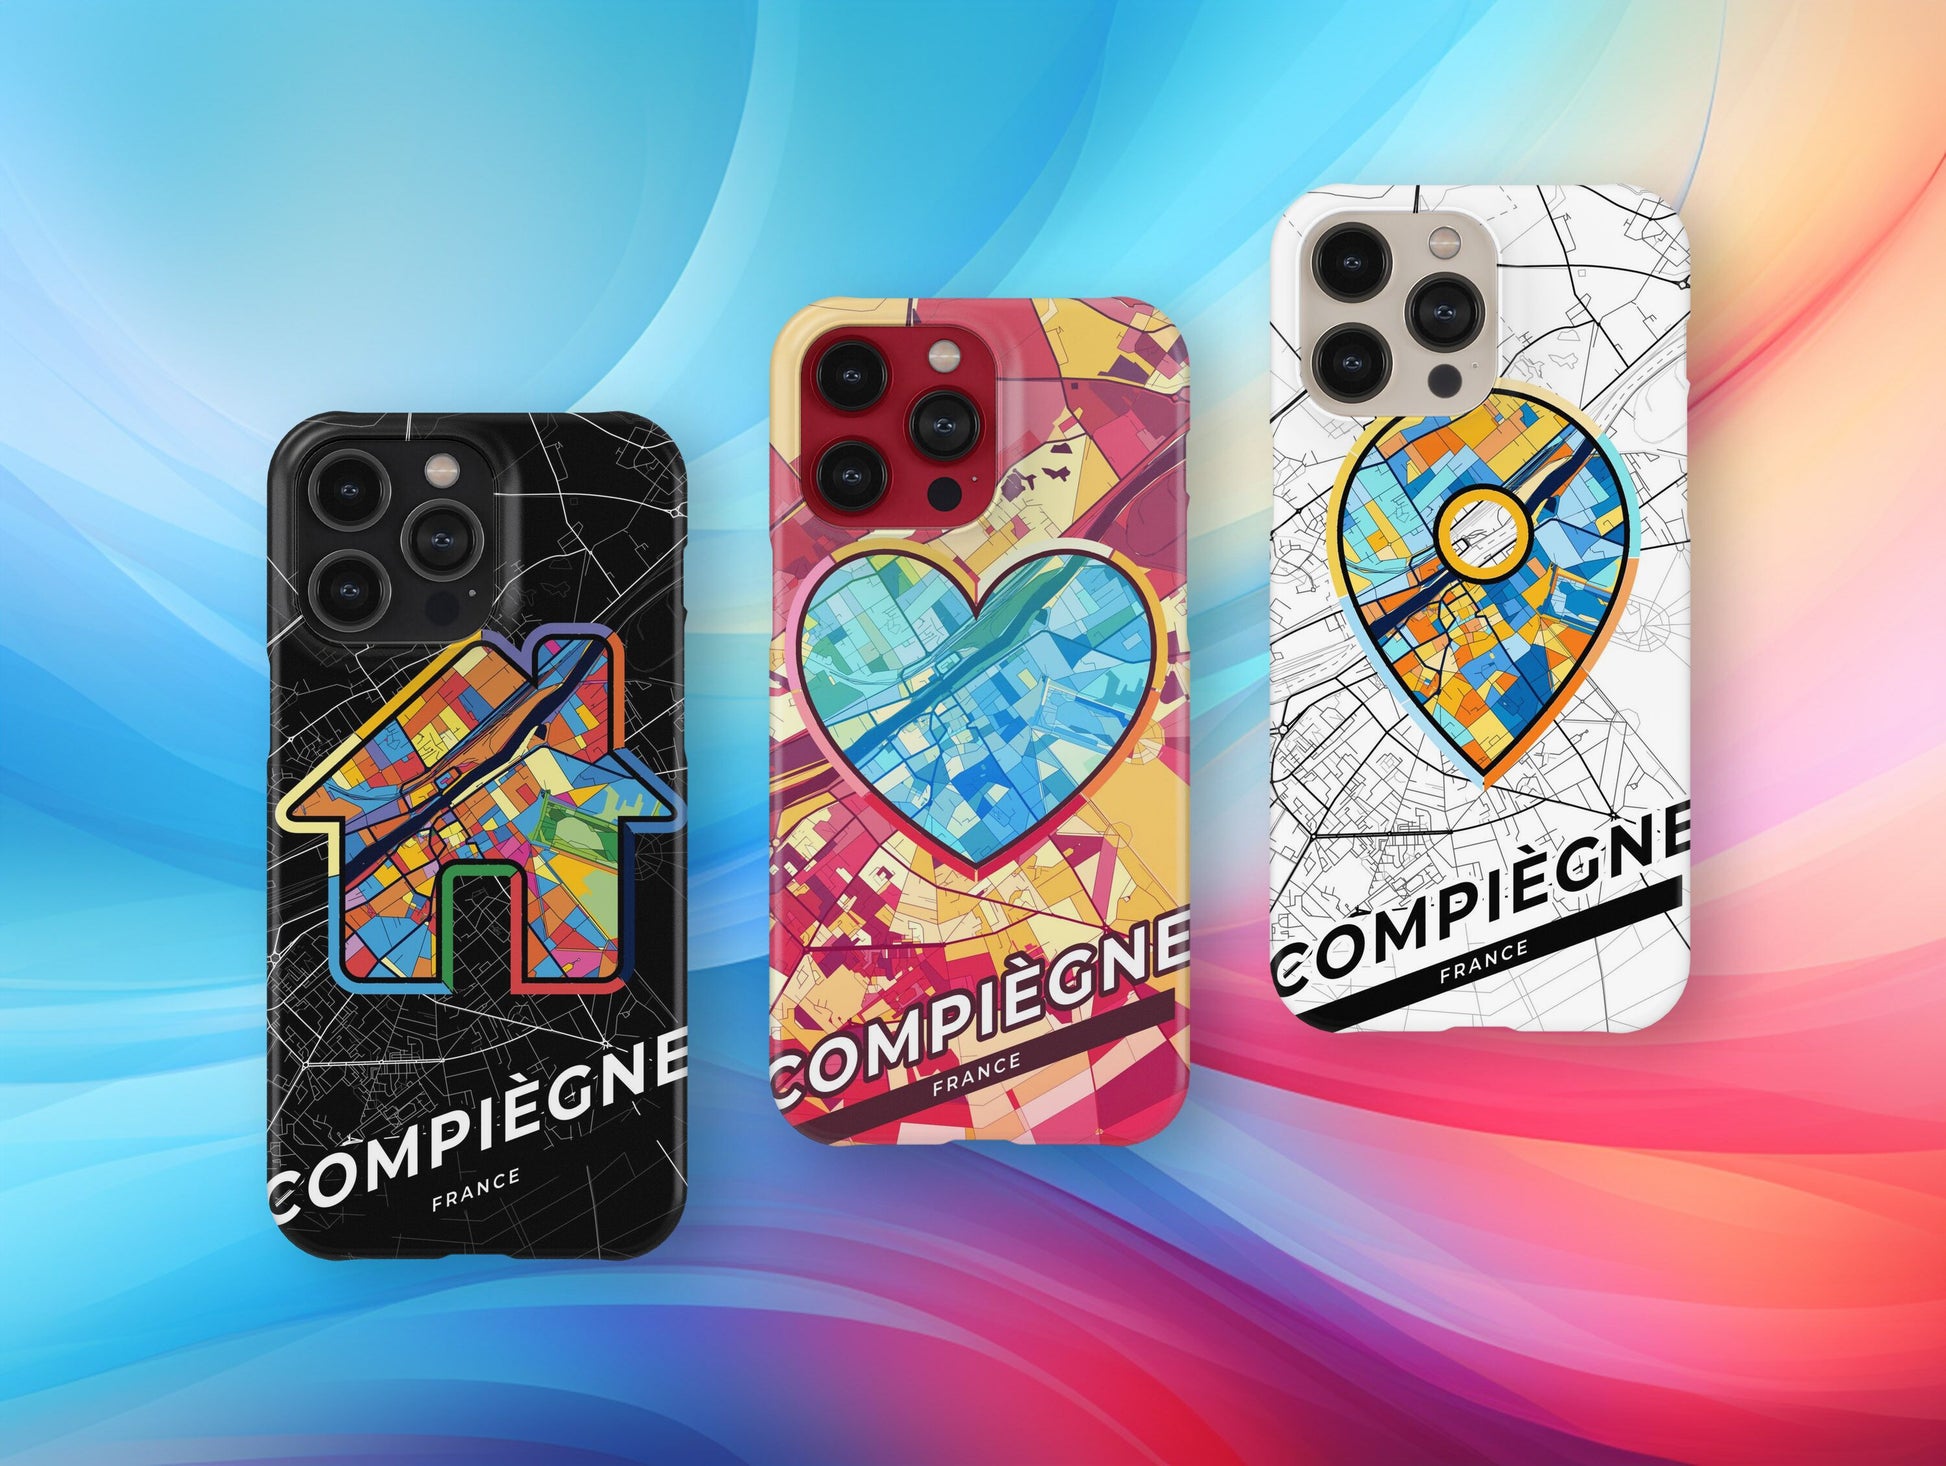 Compiègne France slim phone case with colorful icon. Birthday, wedding or housewarming gift. Couple match cases.